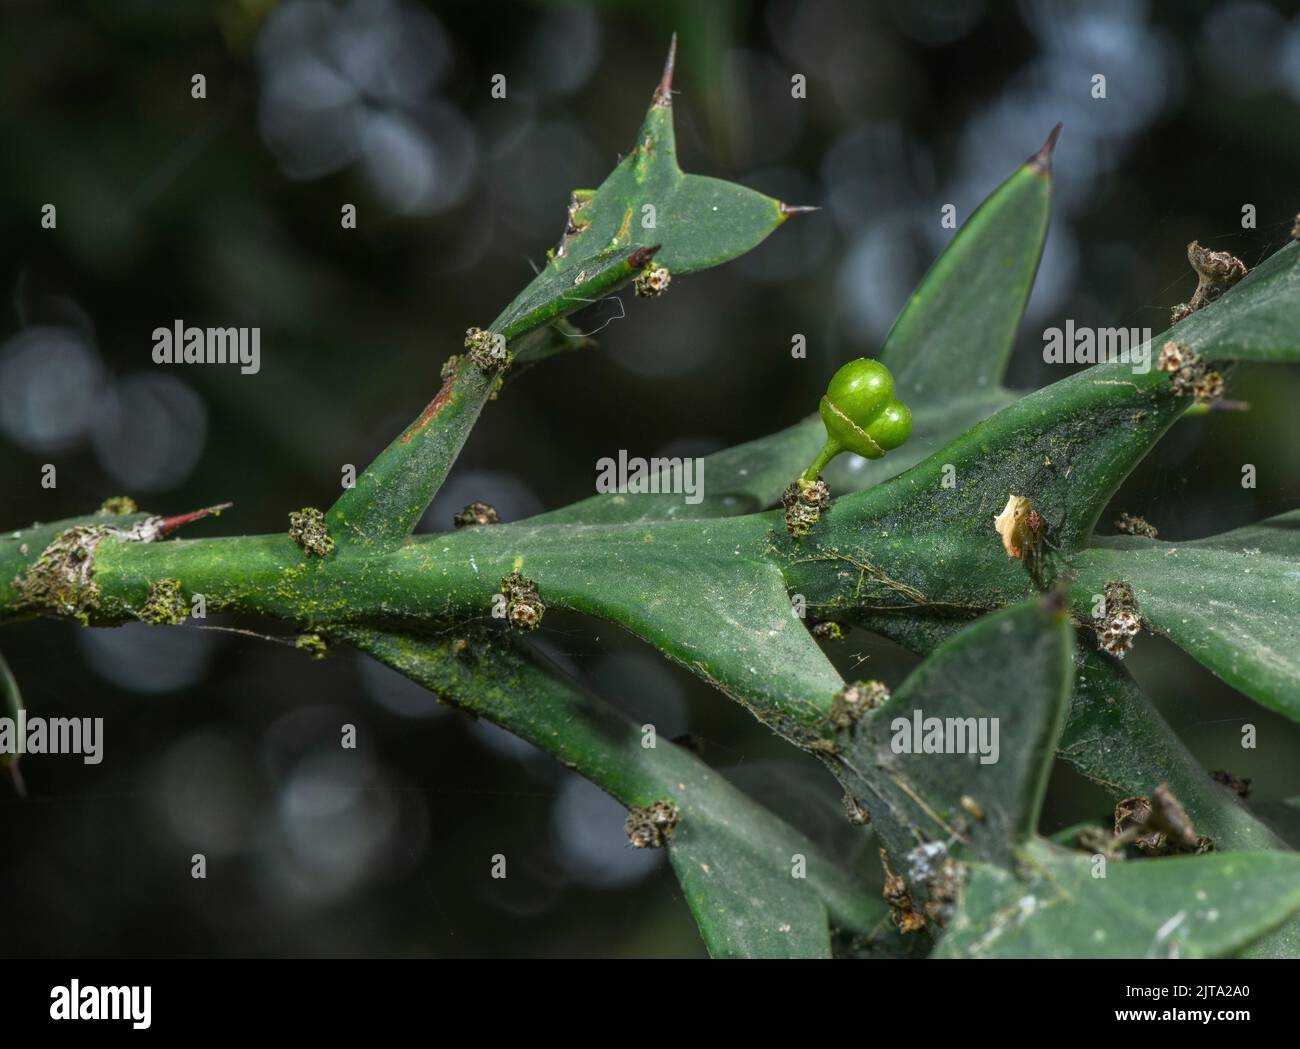 Anchor Plant, Colletia paradoxa, thorns and developing fruit. From South America. Stock Photo